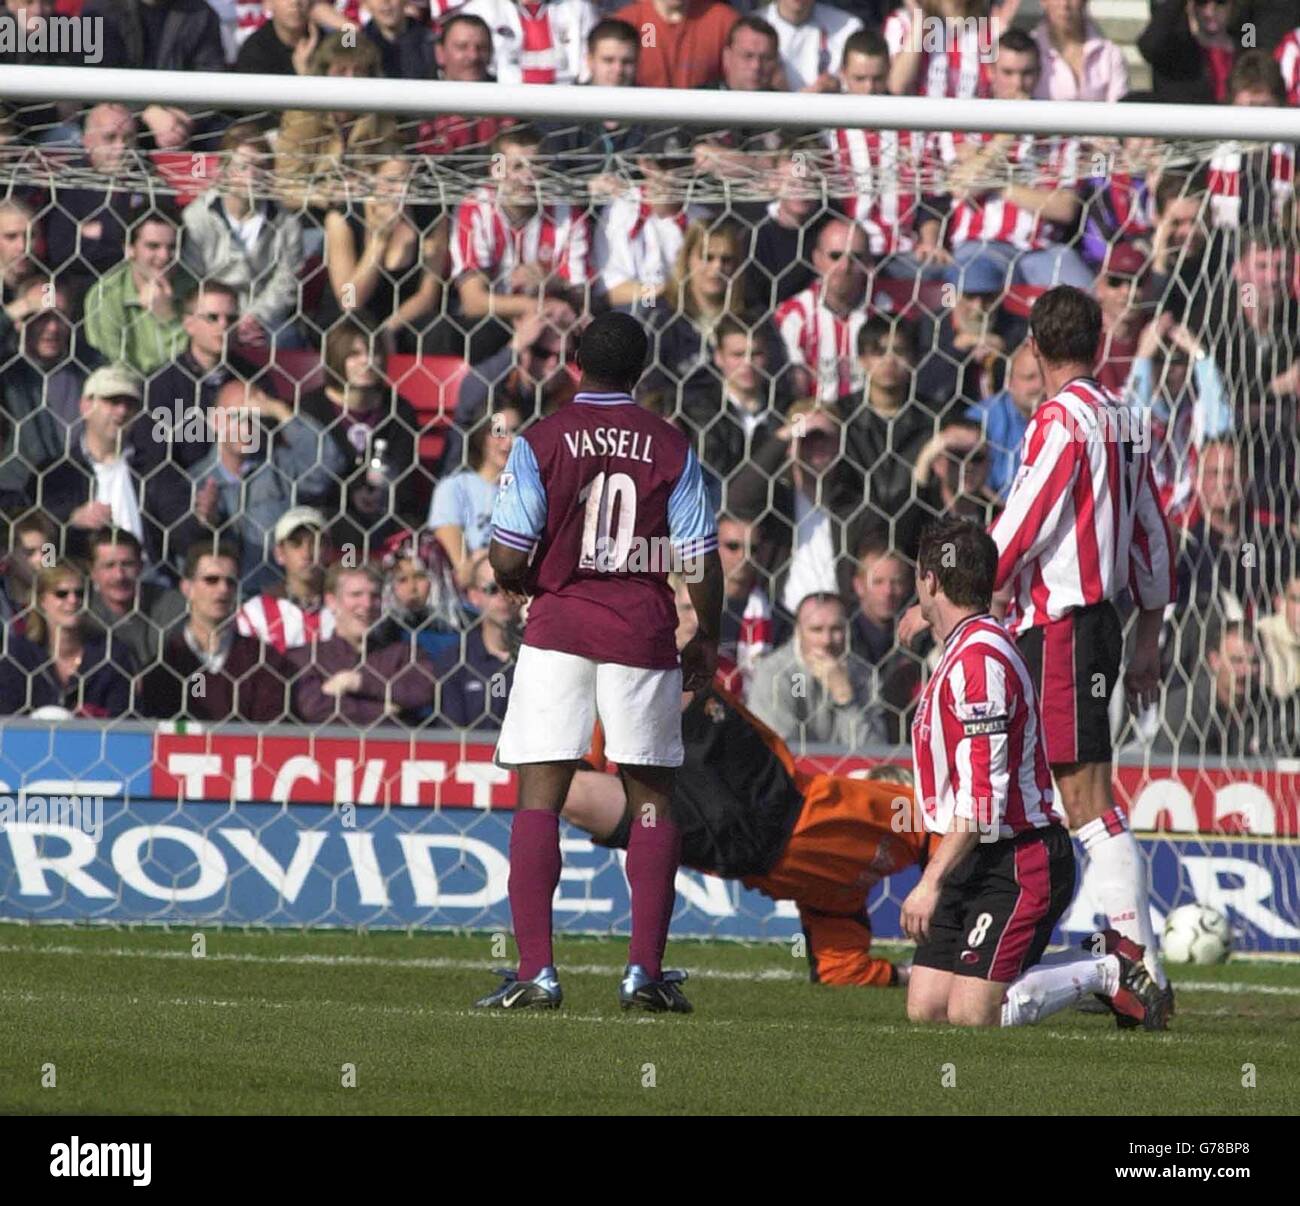 Aston Villa's second goal scorer Darius Vassell putting the ball in the Southampton net, during their FA Barclaycard Premiership match at St Mary's Stadium, Southampton. Stock Photo